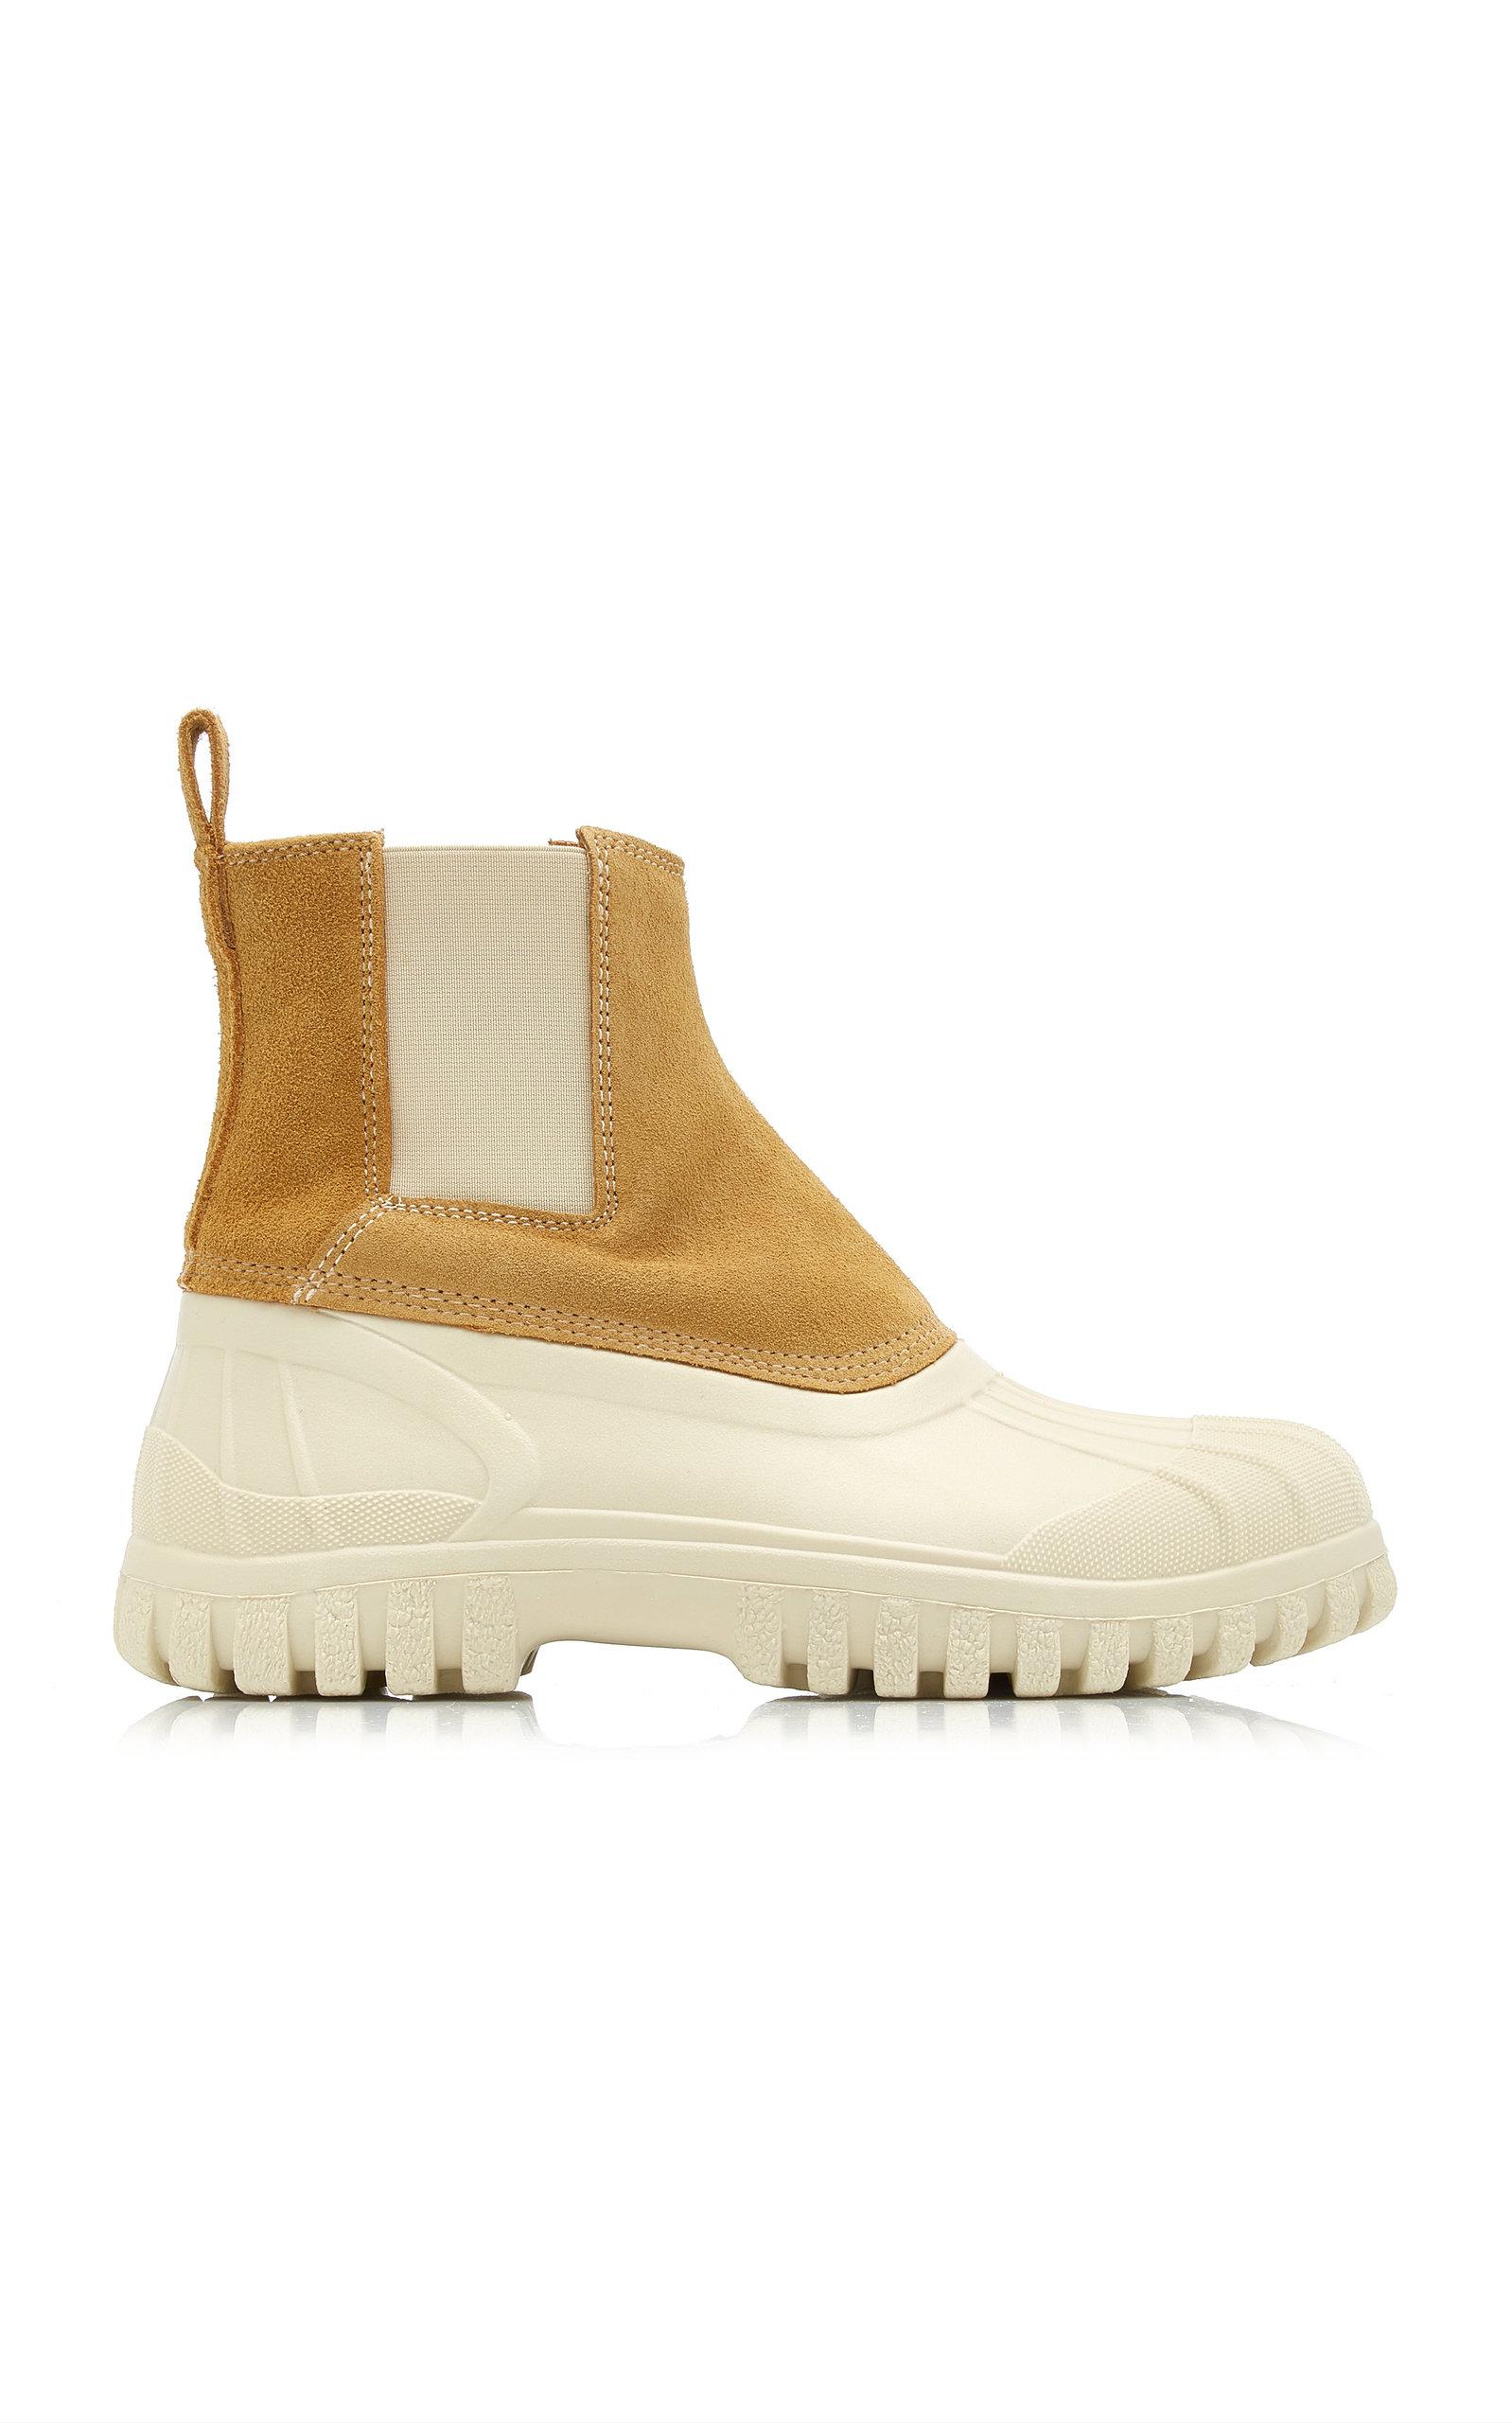 Diemme Balbi Suede Chelsea Boots in Natural | Lyst